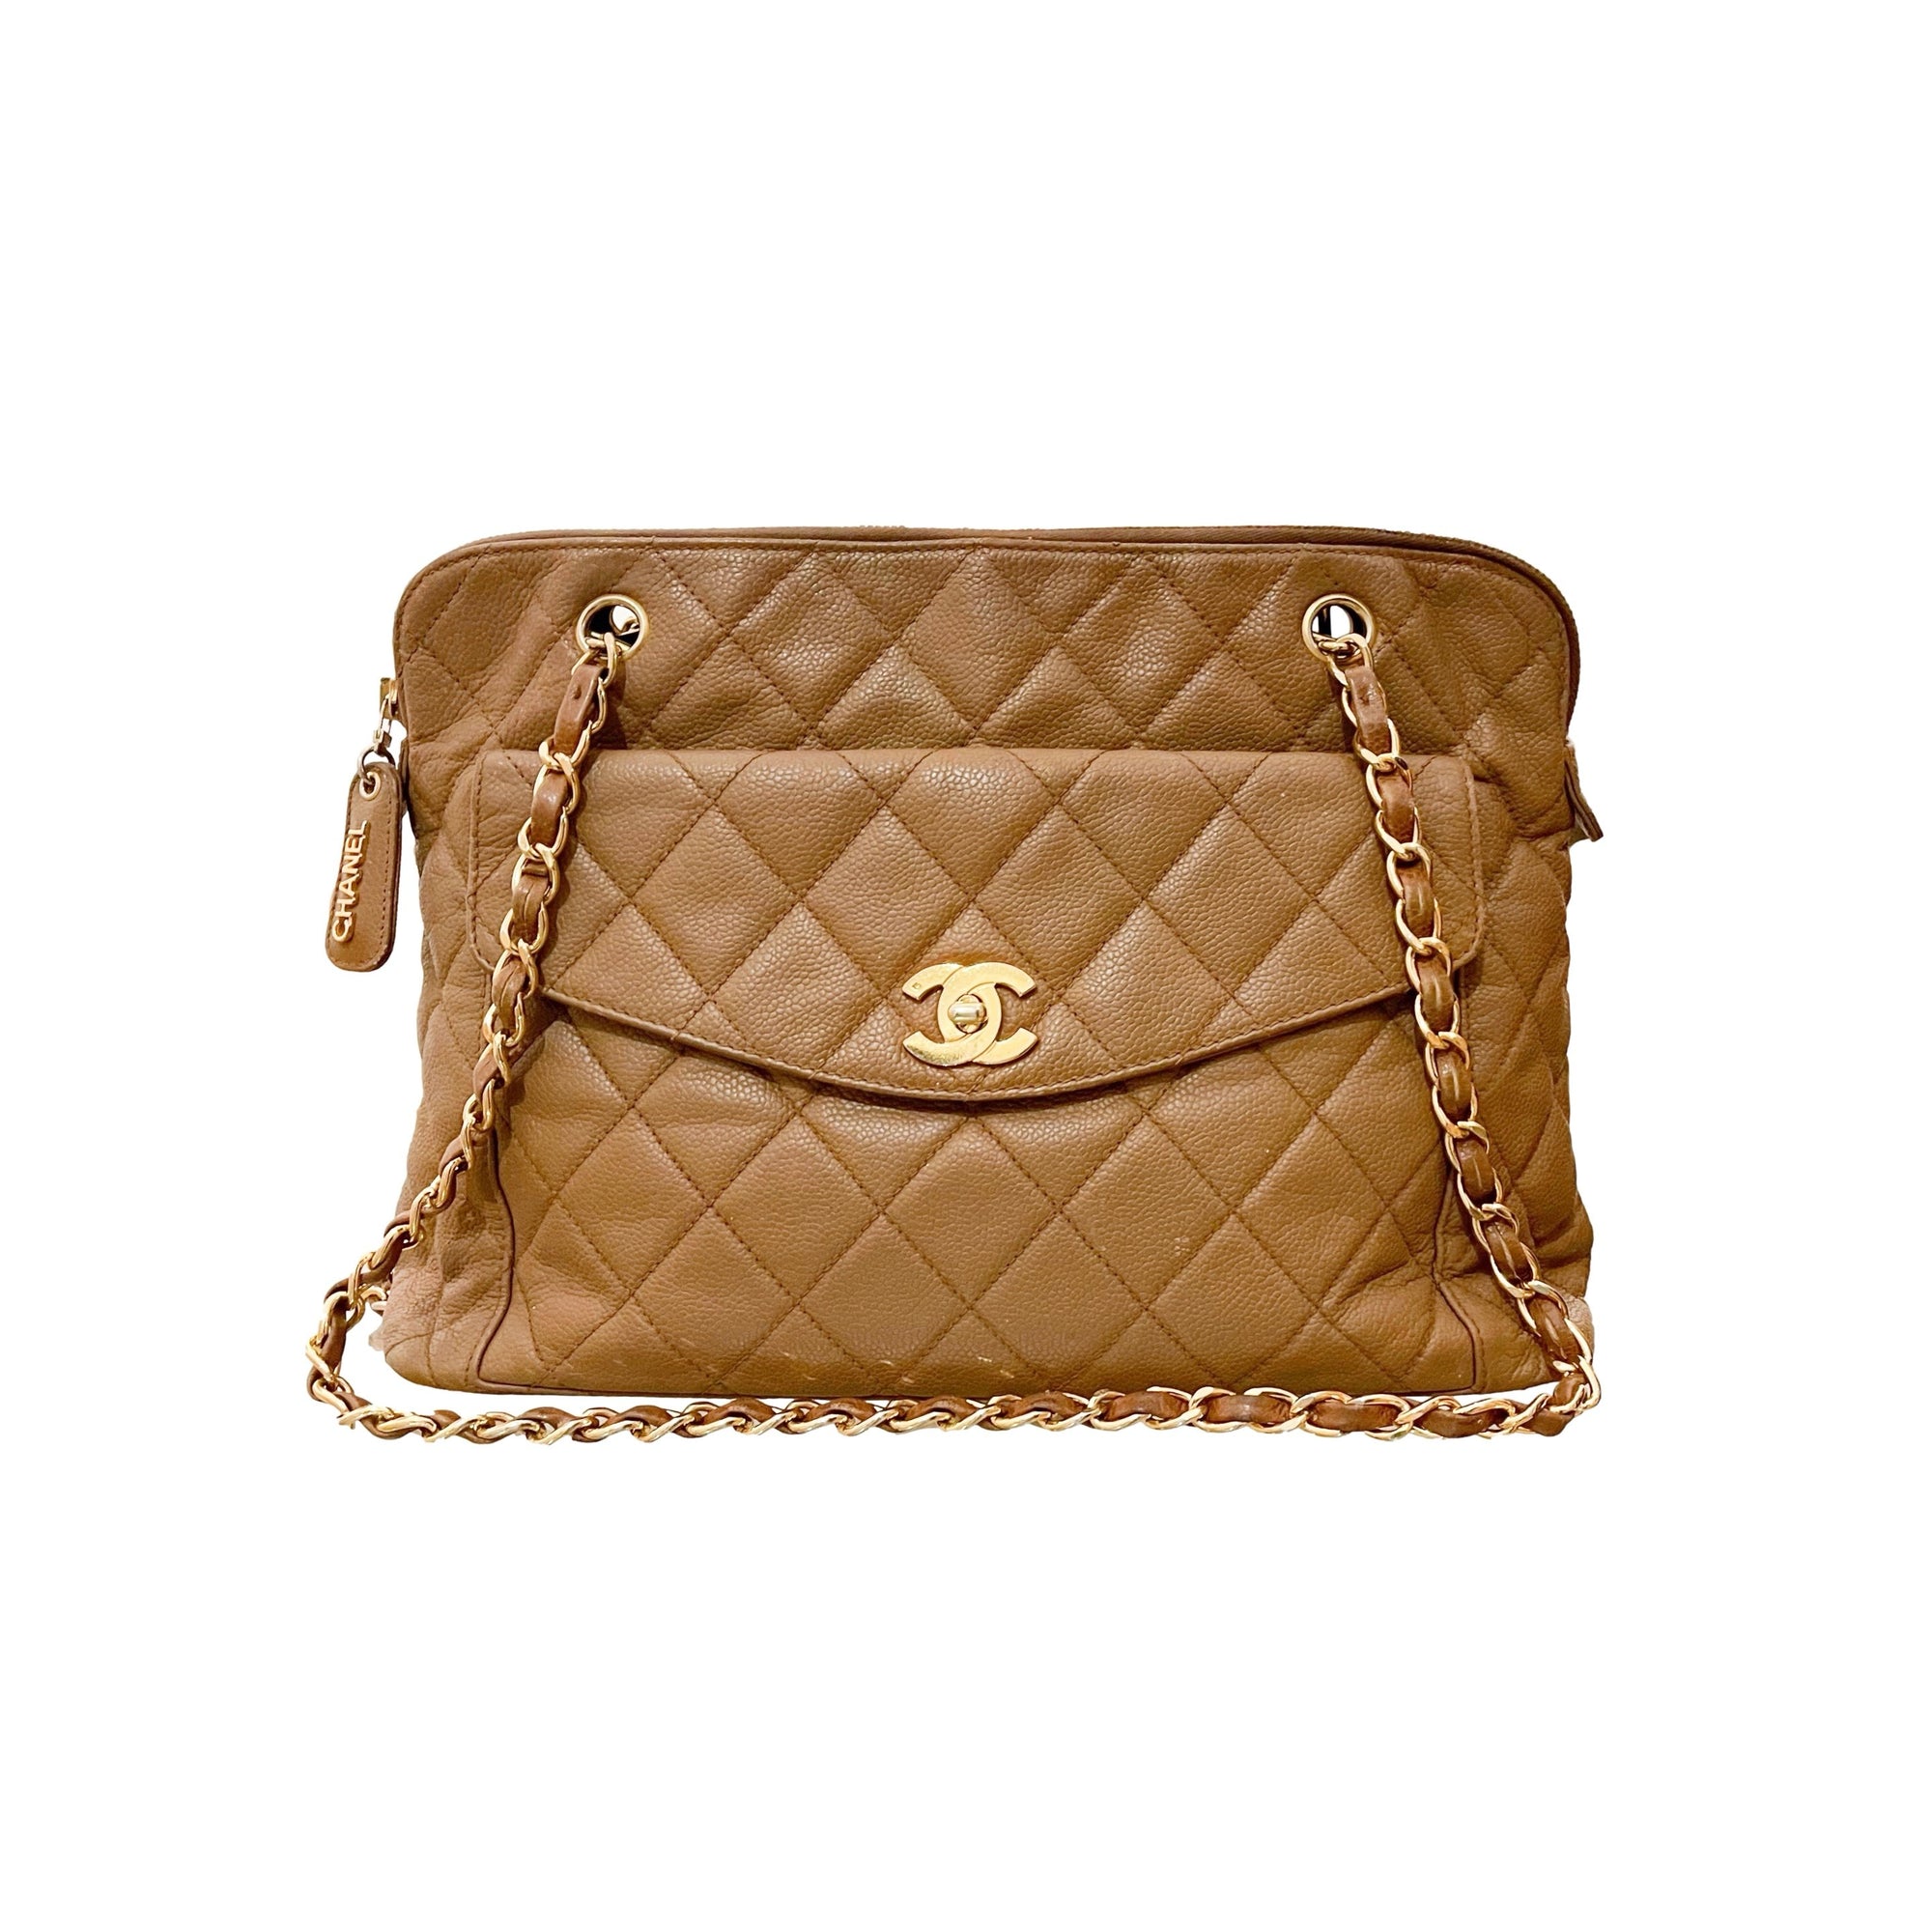 Chanel Tan Quilted Chain Shoulder Bag - Handbags